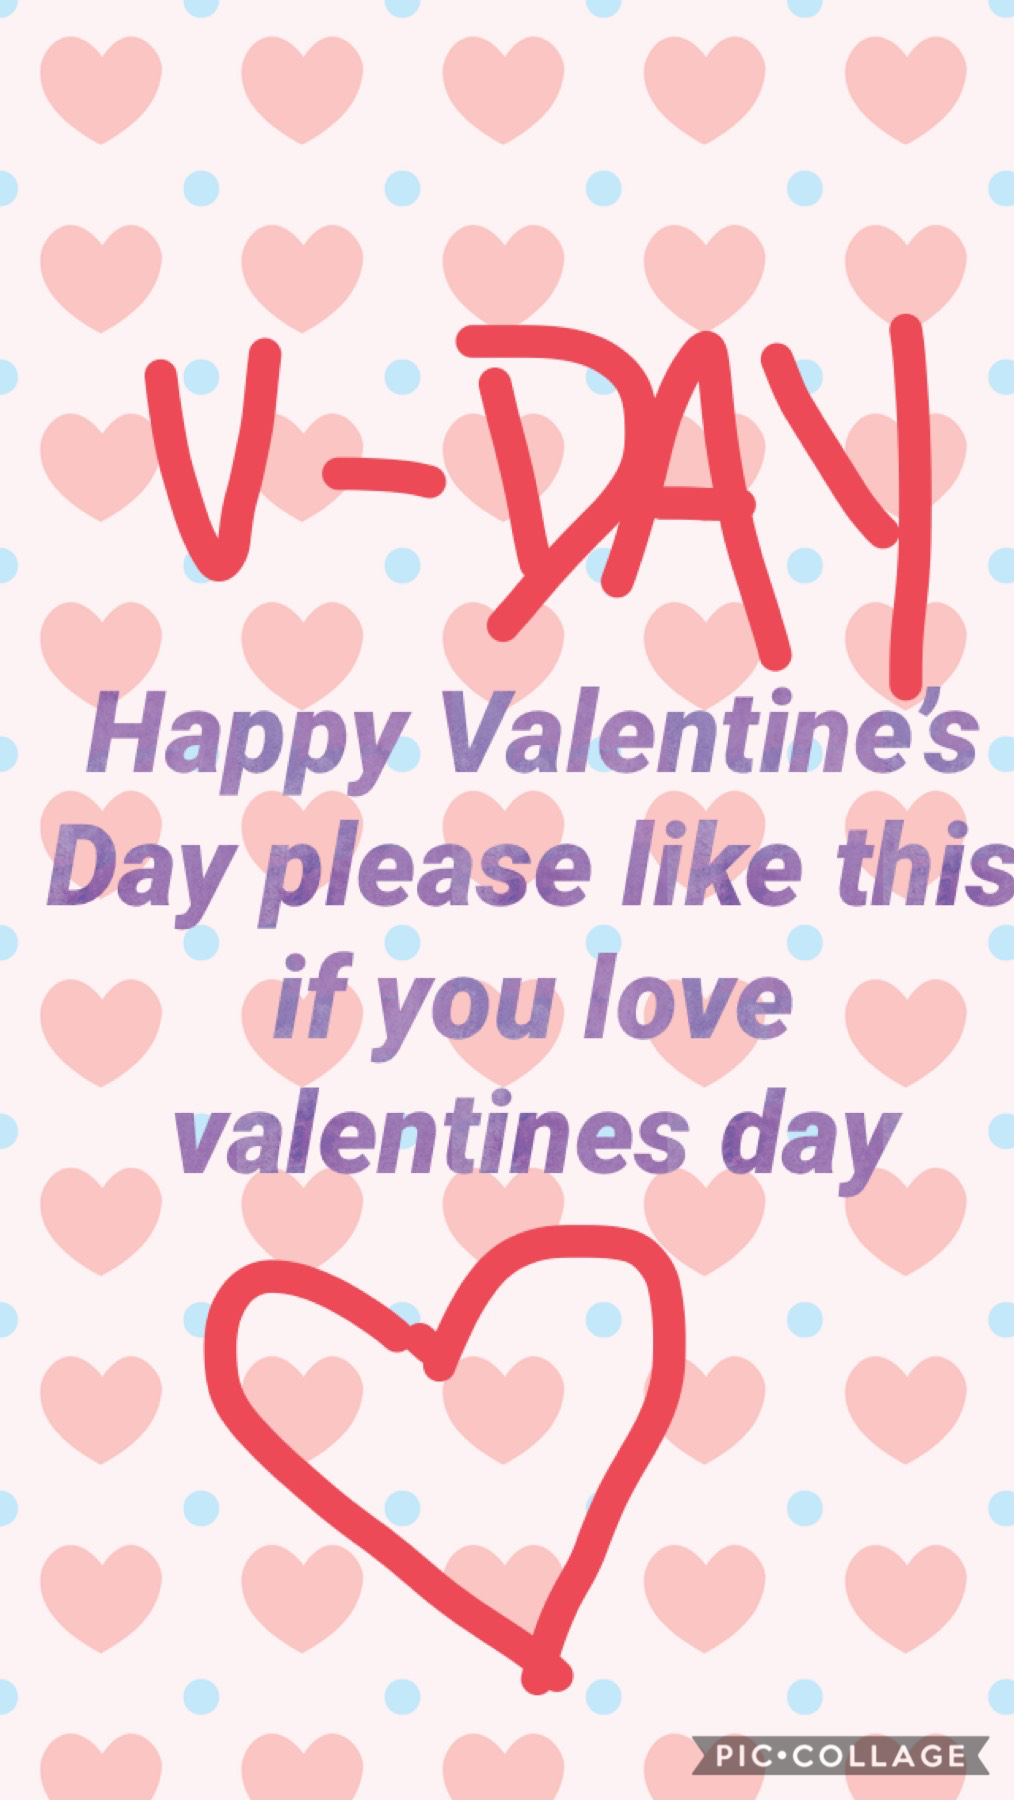 Valentine’s Day can we get this to 20 likes please